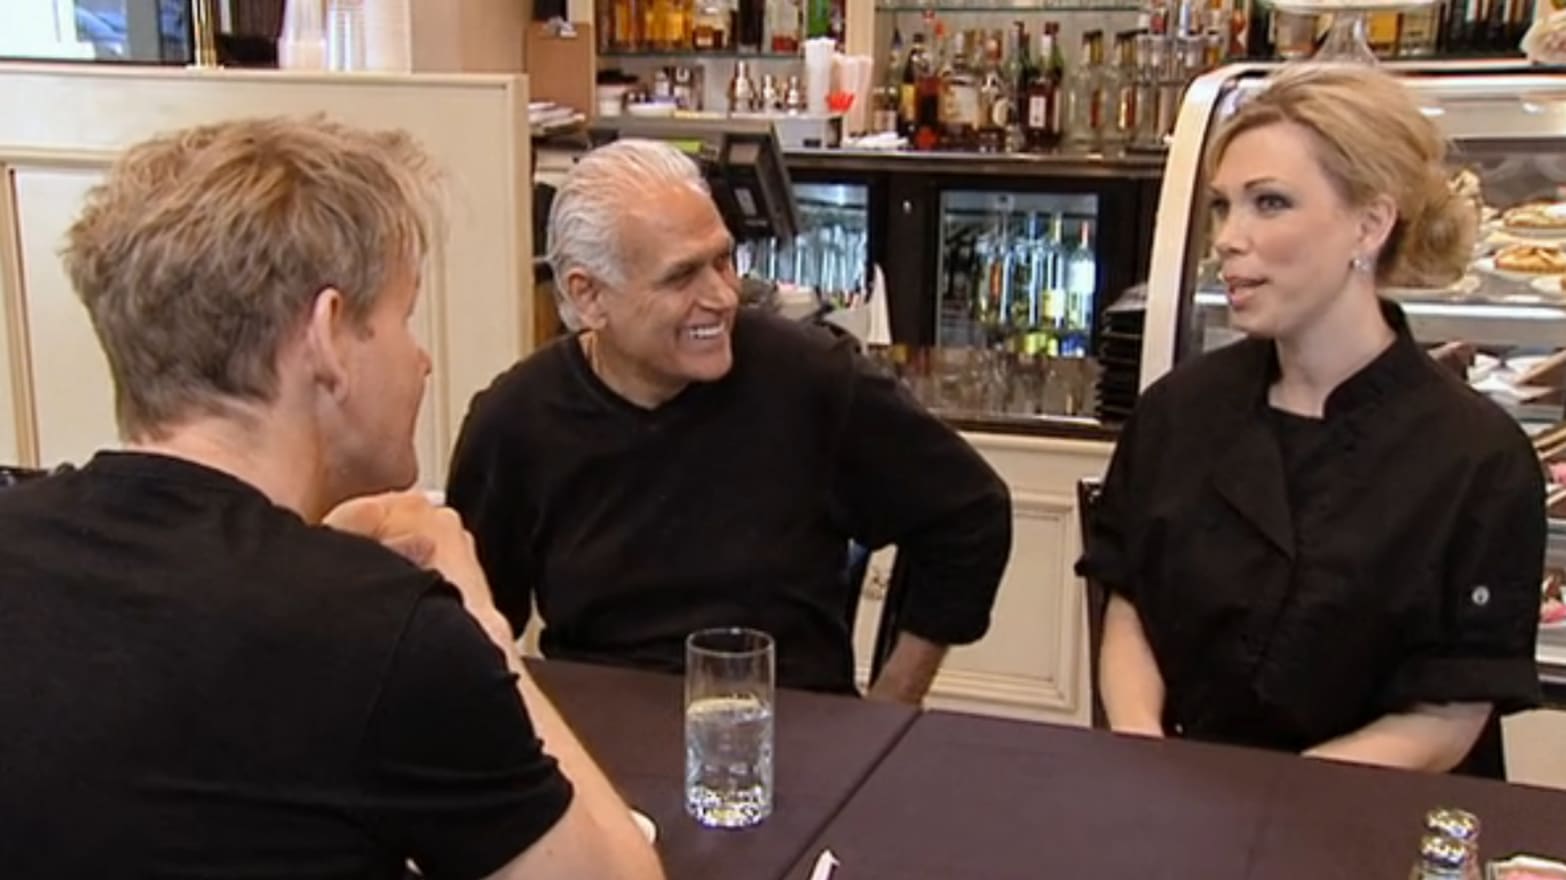 130514 Kitchen Nightmares Couple Tease V47a4p